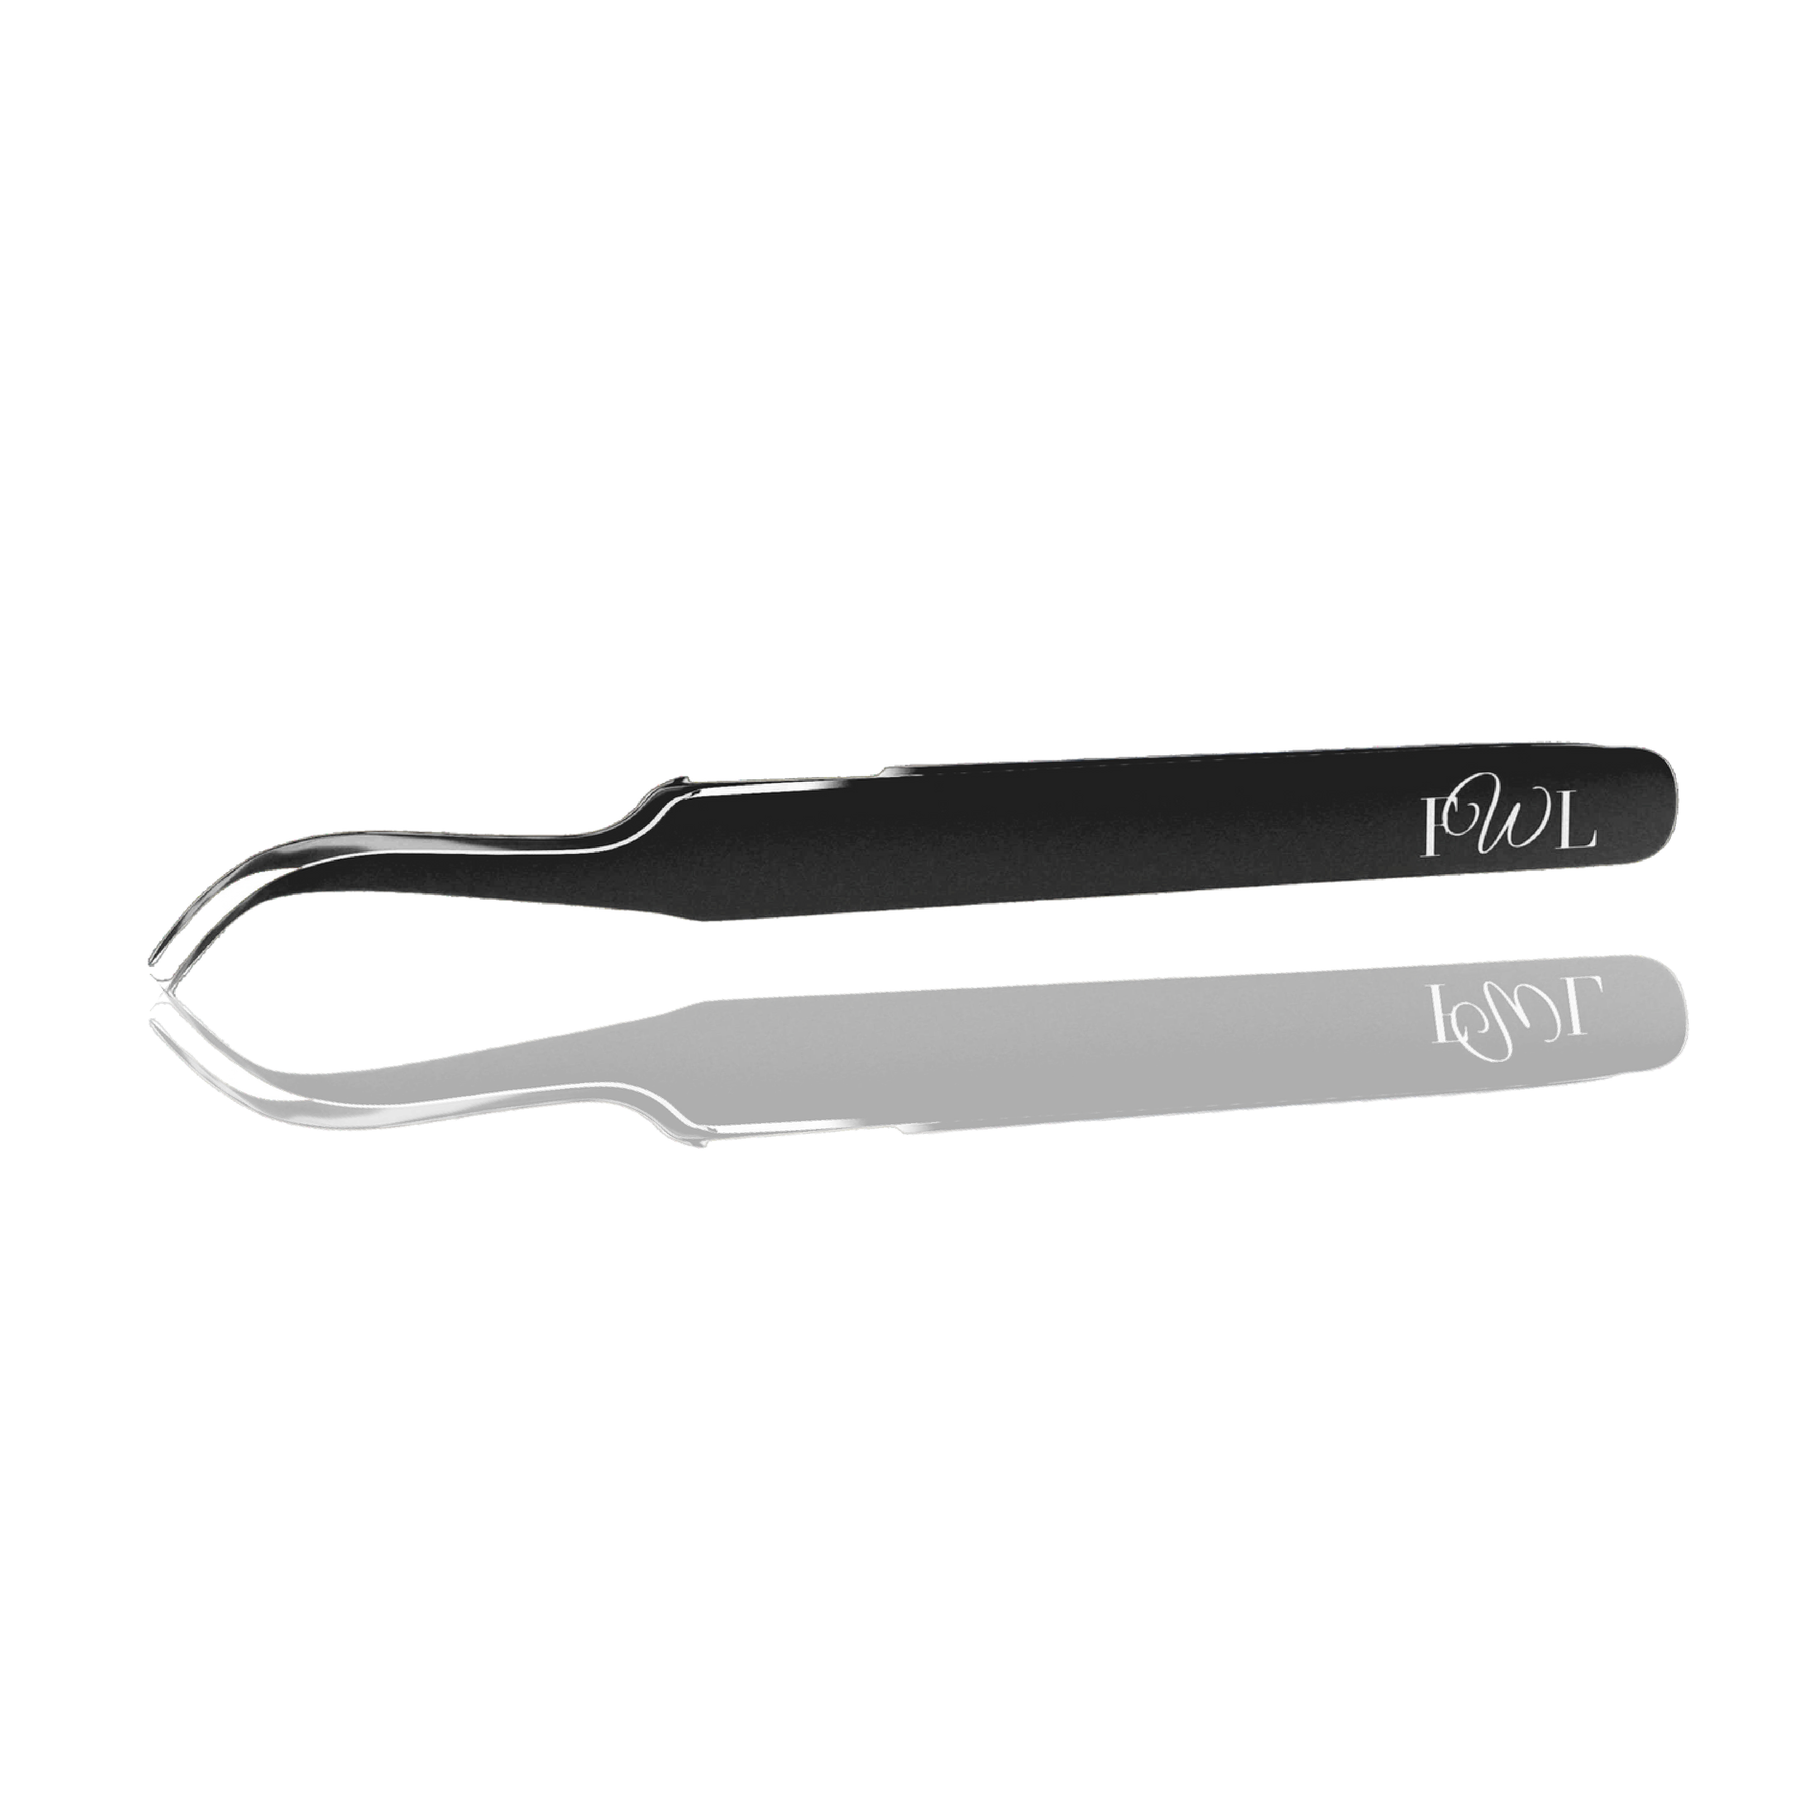 Pro-Curved Tweezers, Stainless Steel - Tweezers - JB Lashes – Pro Shop JB  LASHES